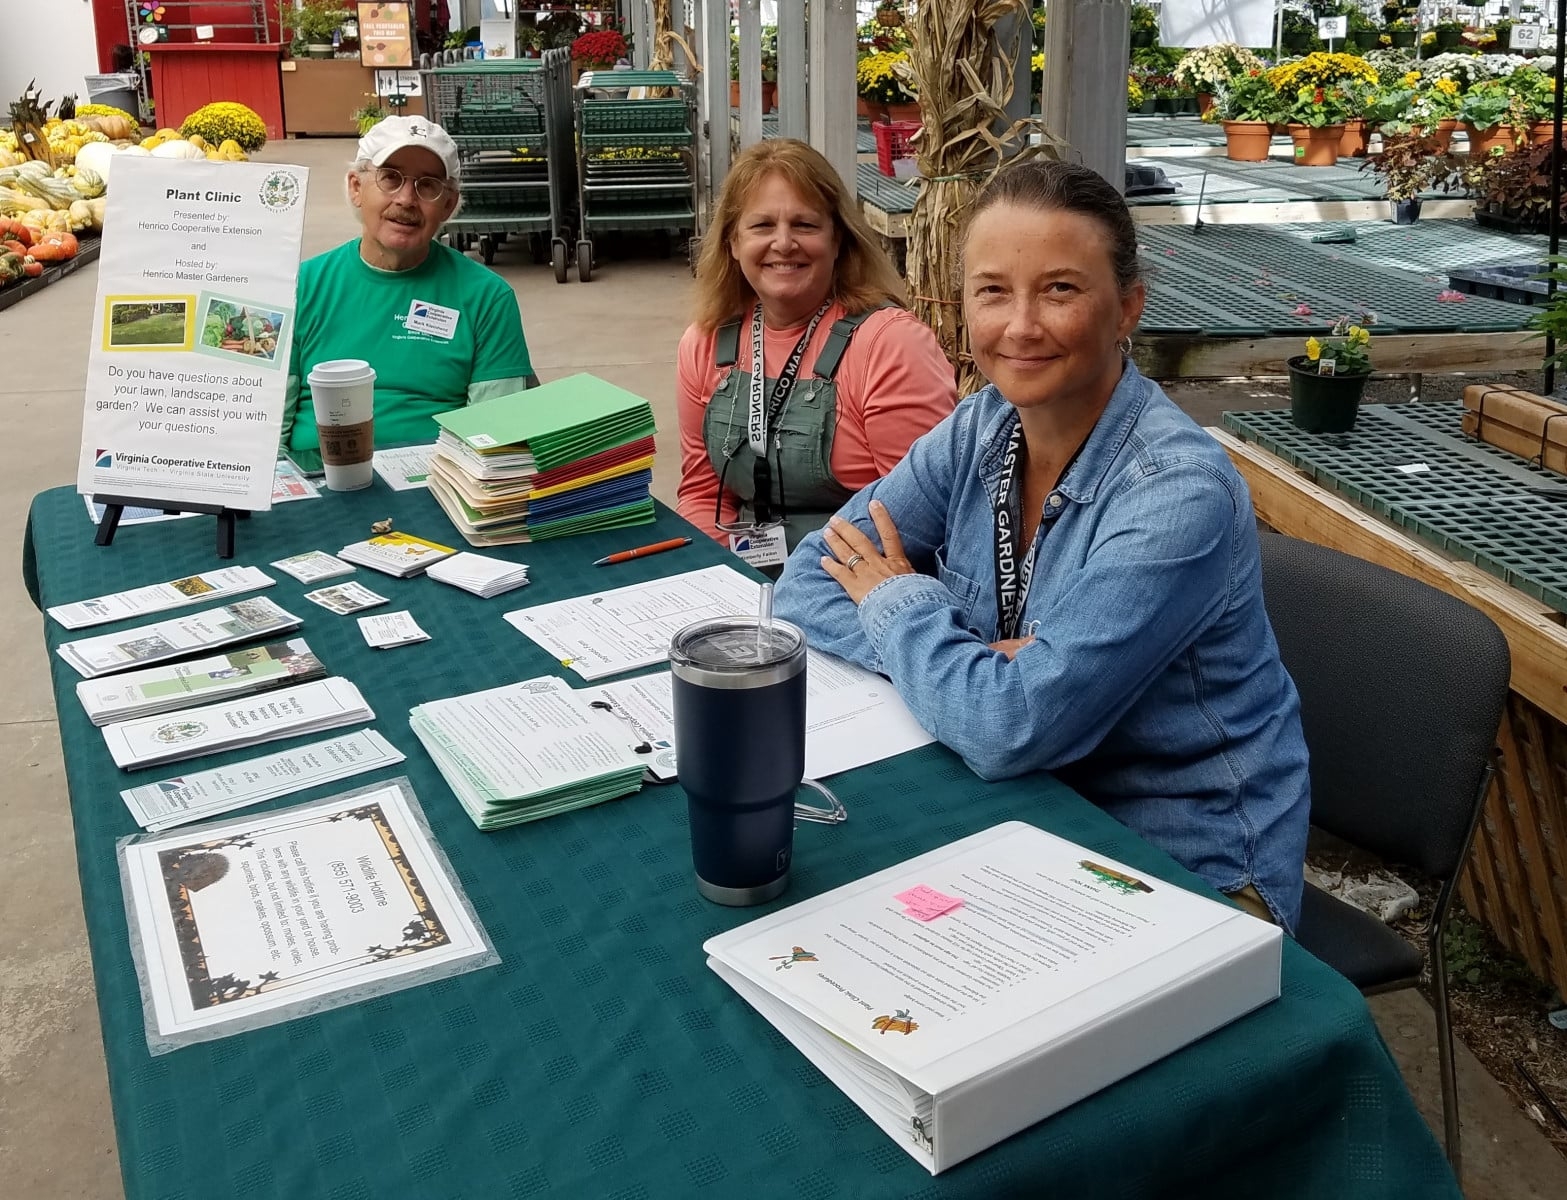 Three Henrico Master Gardeners sitting at a table with reference materials.